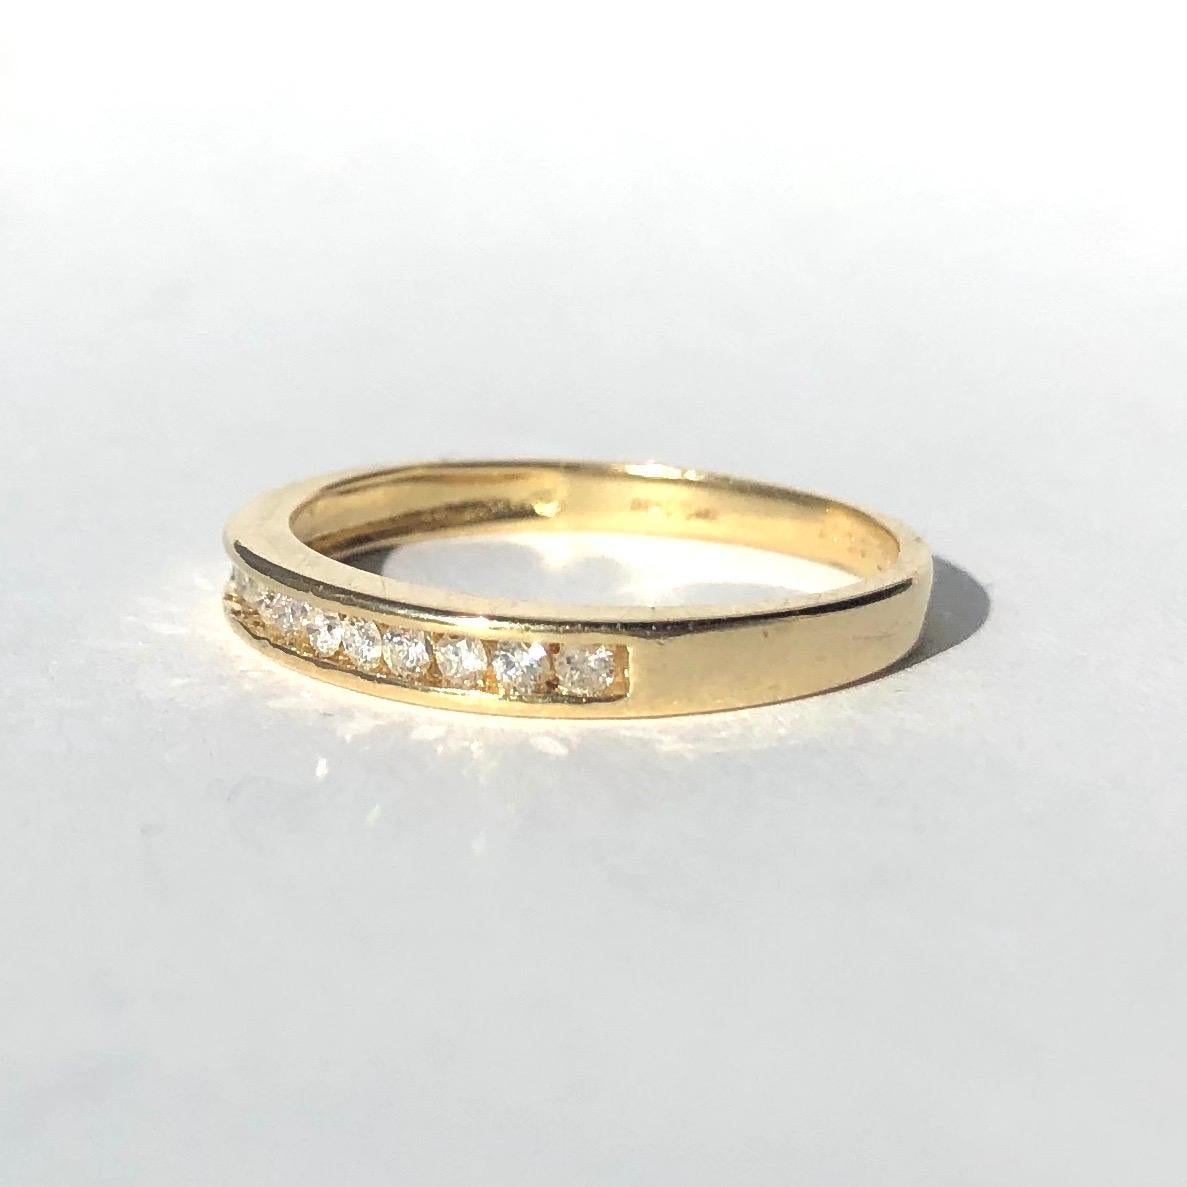 Each diamond in this simple and stylish band measure 3pts. There are 11 diamonds in total and they are wonderfully bright and have a great sparkle. The diamonds are set within an 18ct gold band. 

Ring Size: M or 6 1/4
Band Width: 2.5mm

Weight: